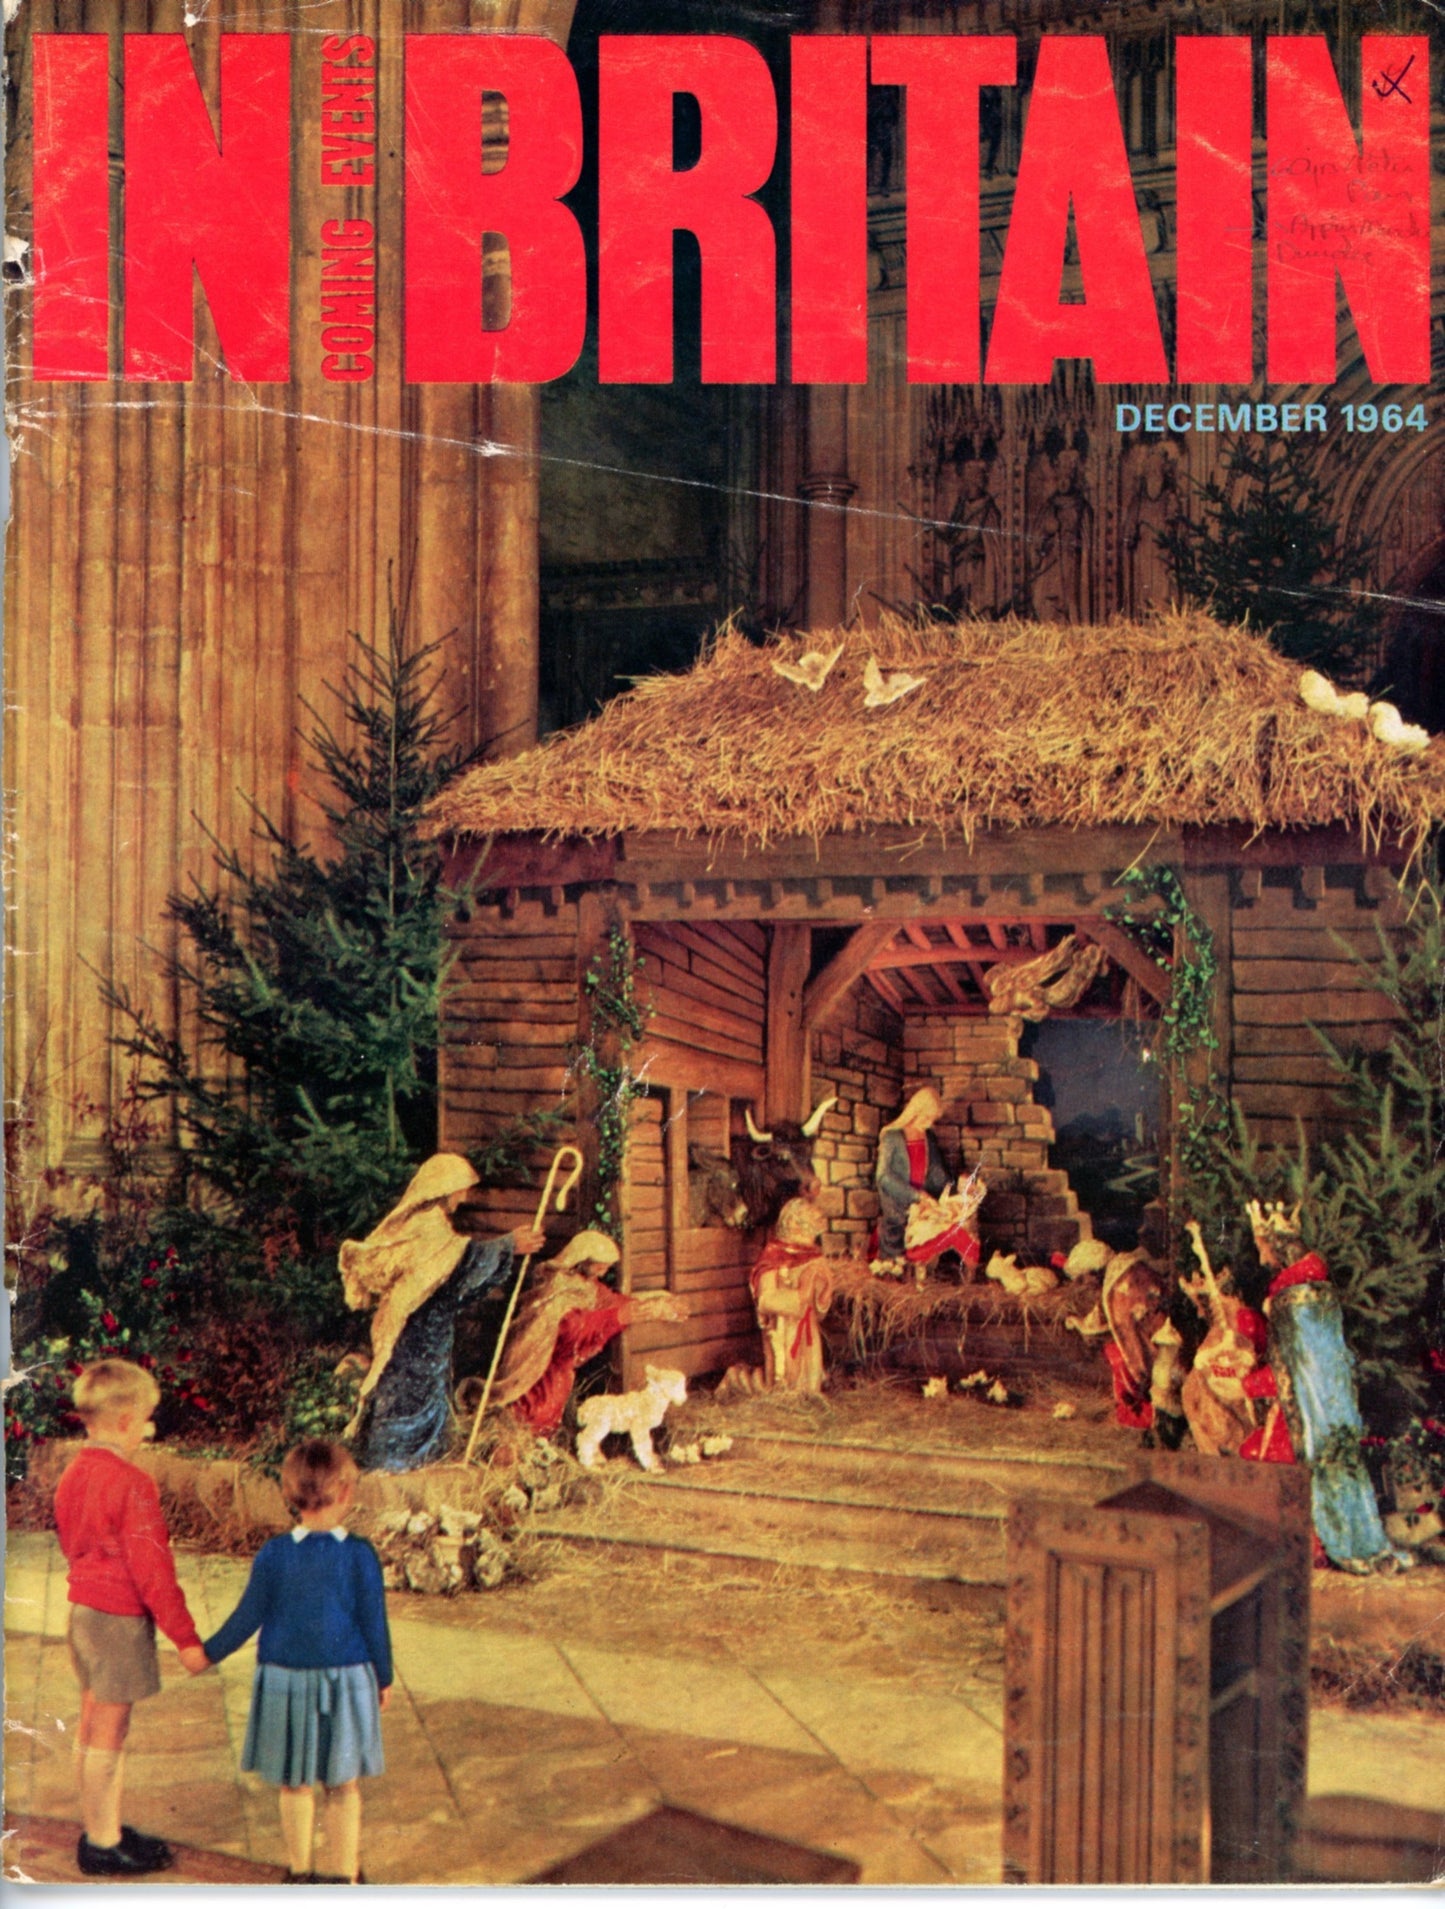 COMING EVENTS IN BRITAIN Vintage Travel Magazines Single Issues © December 1964